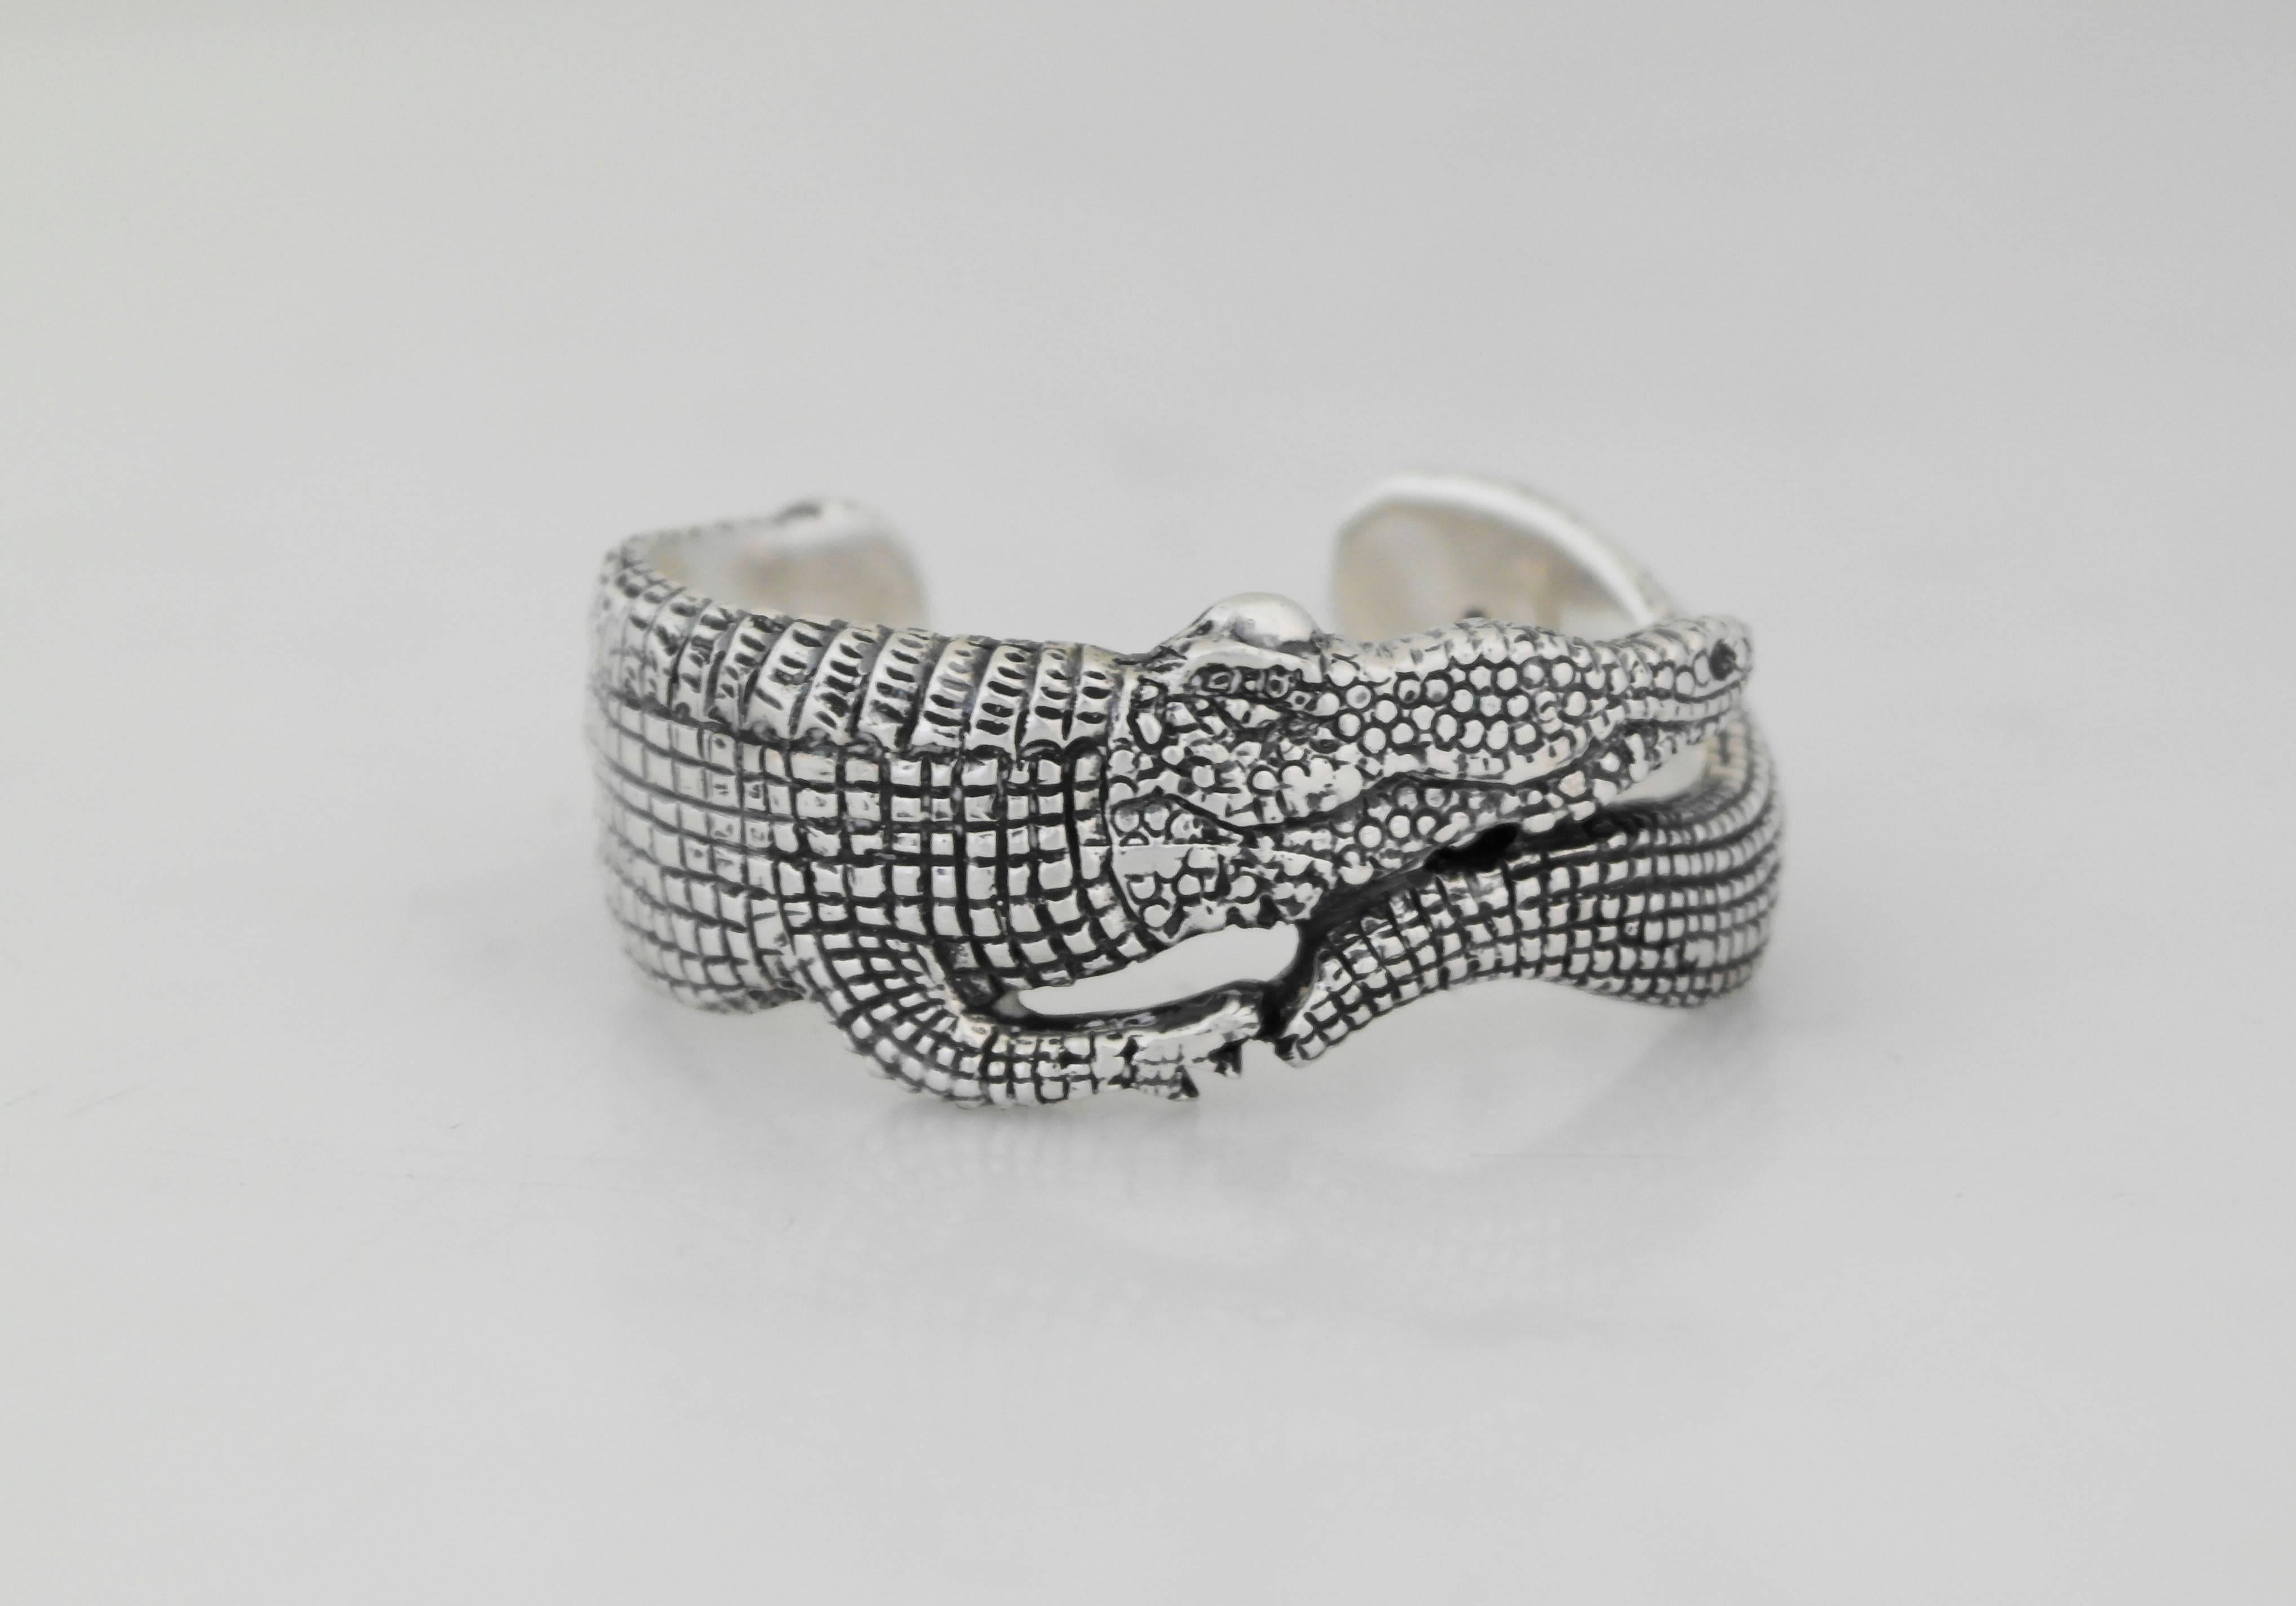 Being offered is a sterling silver cuff bracelet by Emilia Castillo of Taxco, Mexico. Cuff in a figural alligator motif with a textured design. Dimensions: wearable 6 1/2 inches x 1 inch wide x 1 inch opening. Marked as illustrated. In excellent